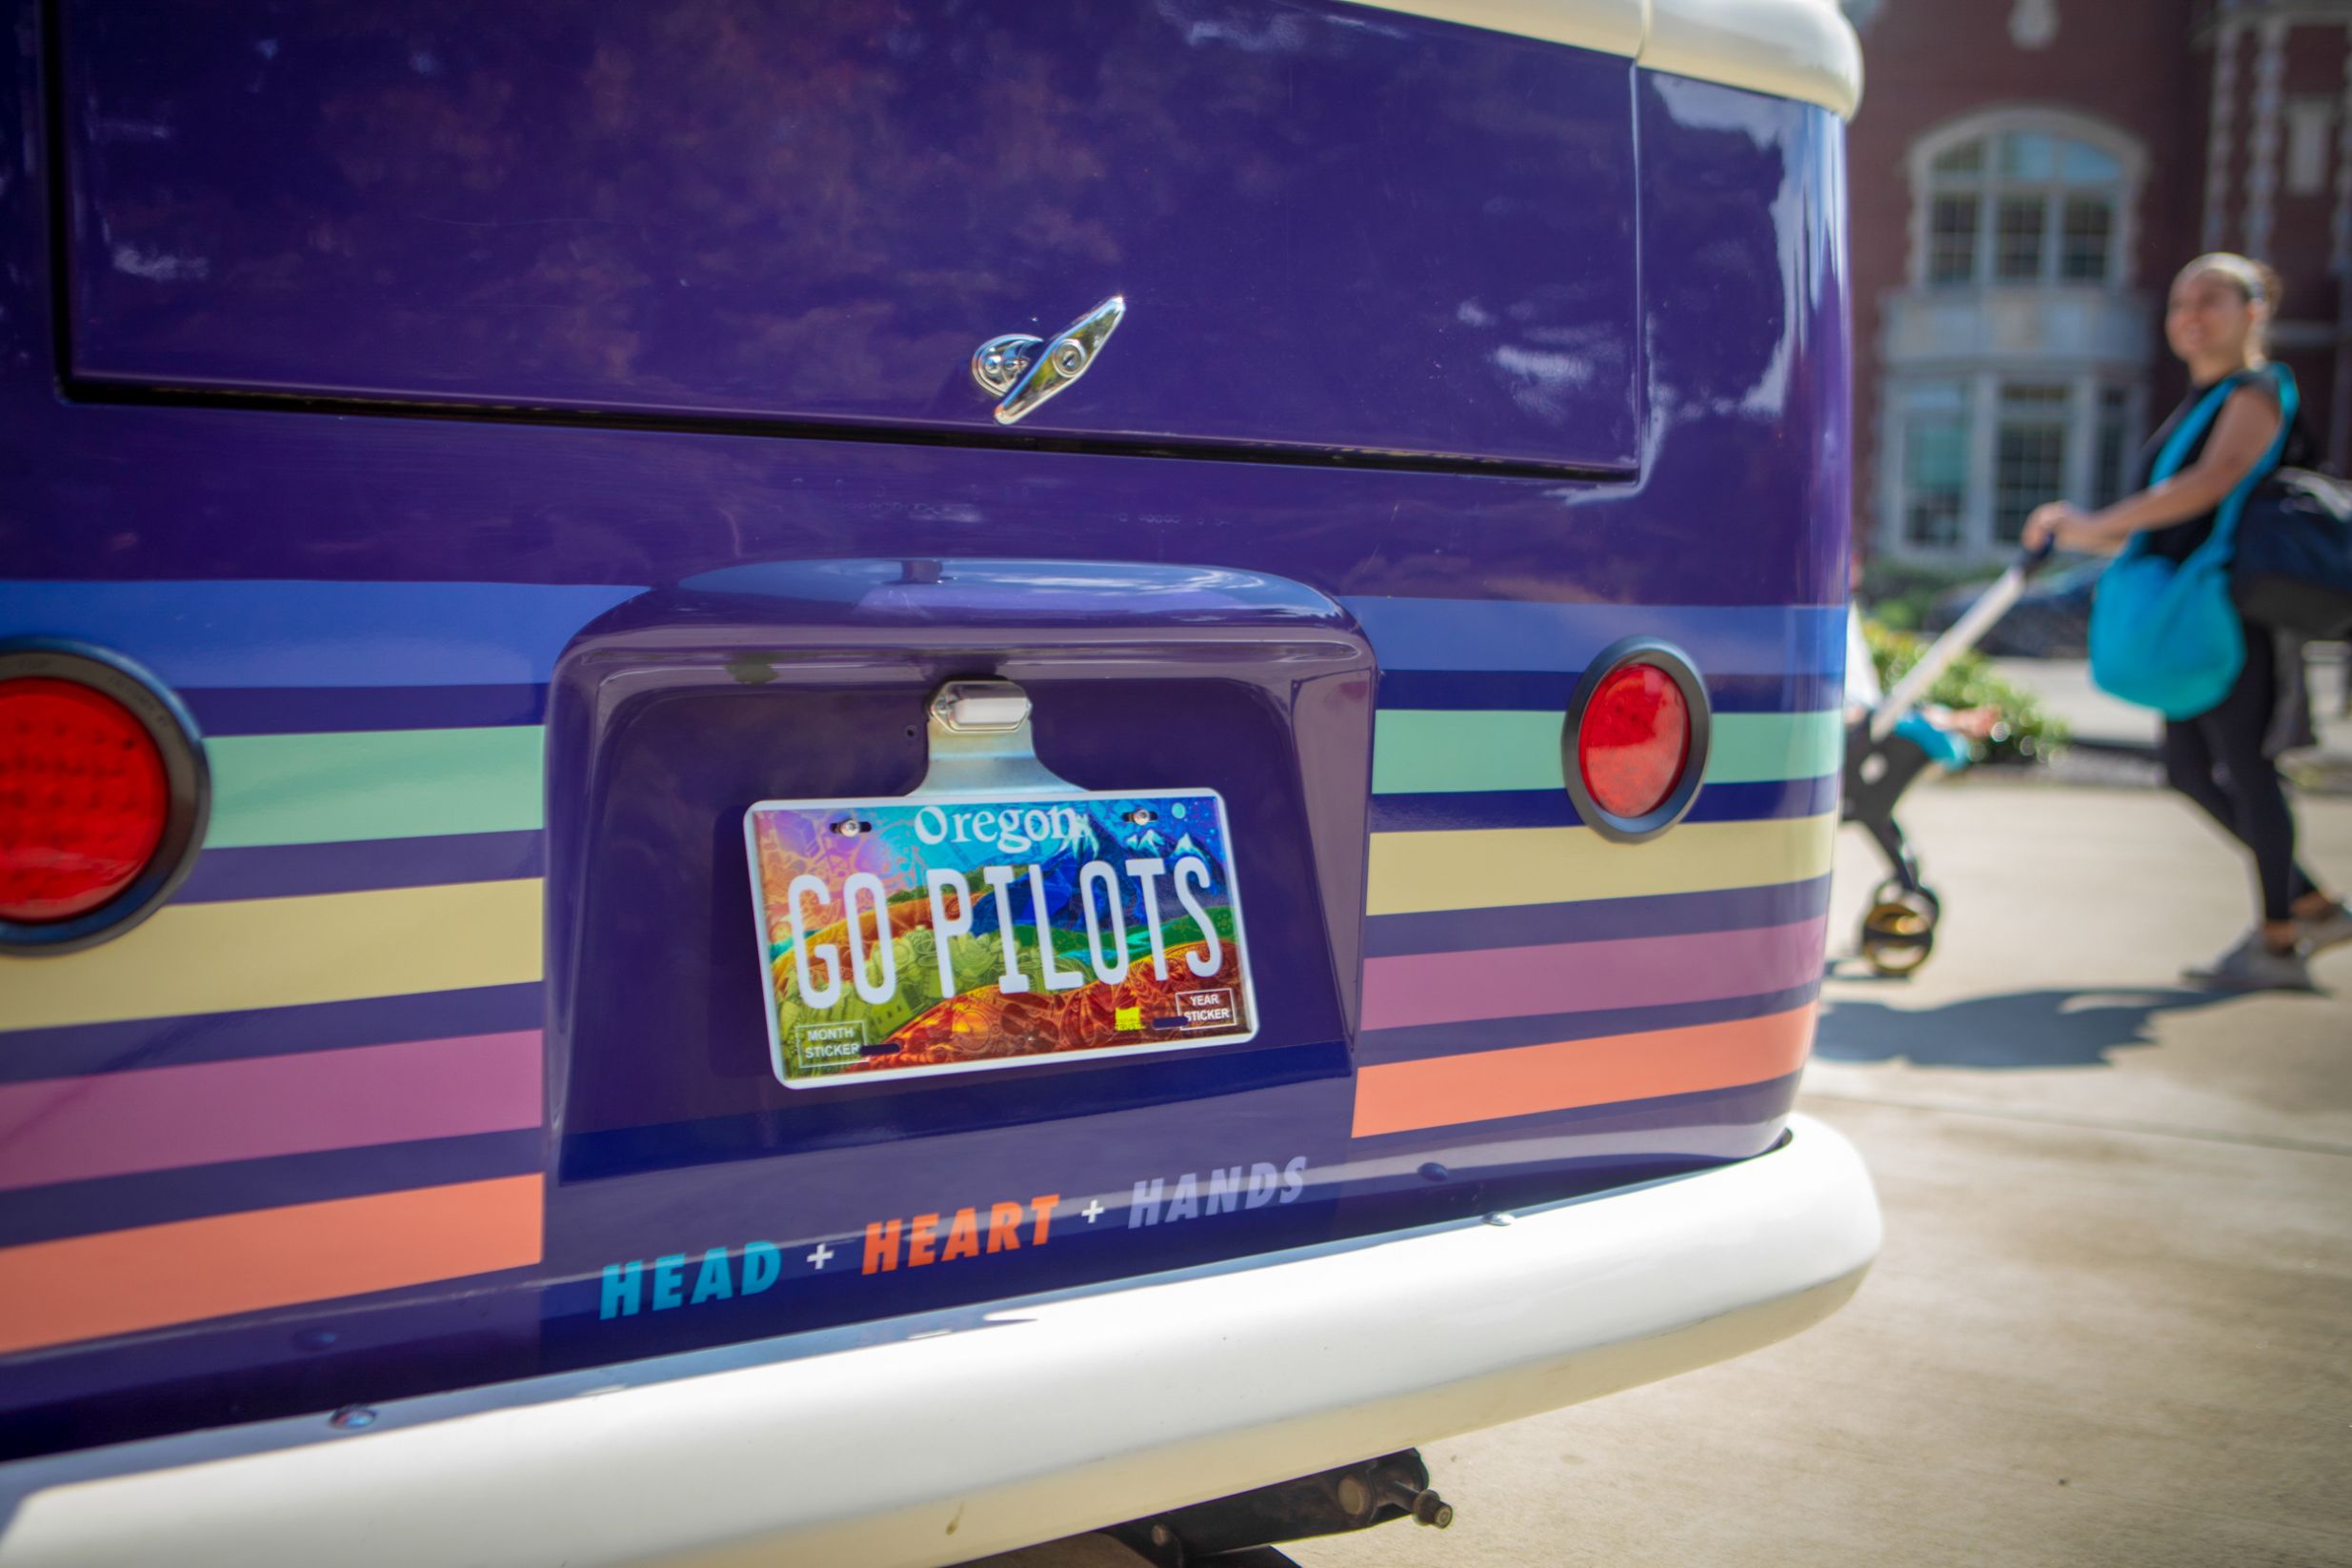 A close-up image of the back end of a colorful car with a license plate that says "Go Pilots"